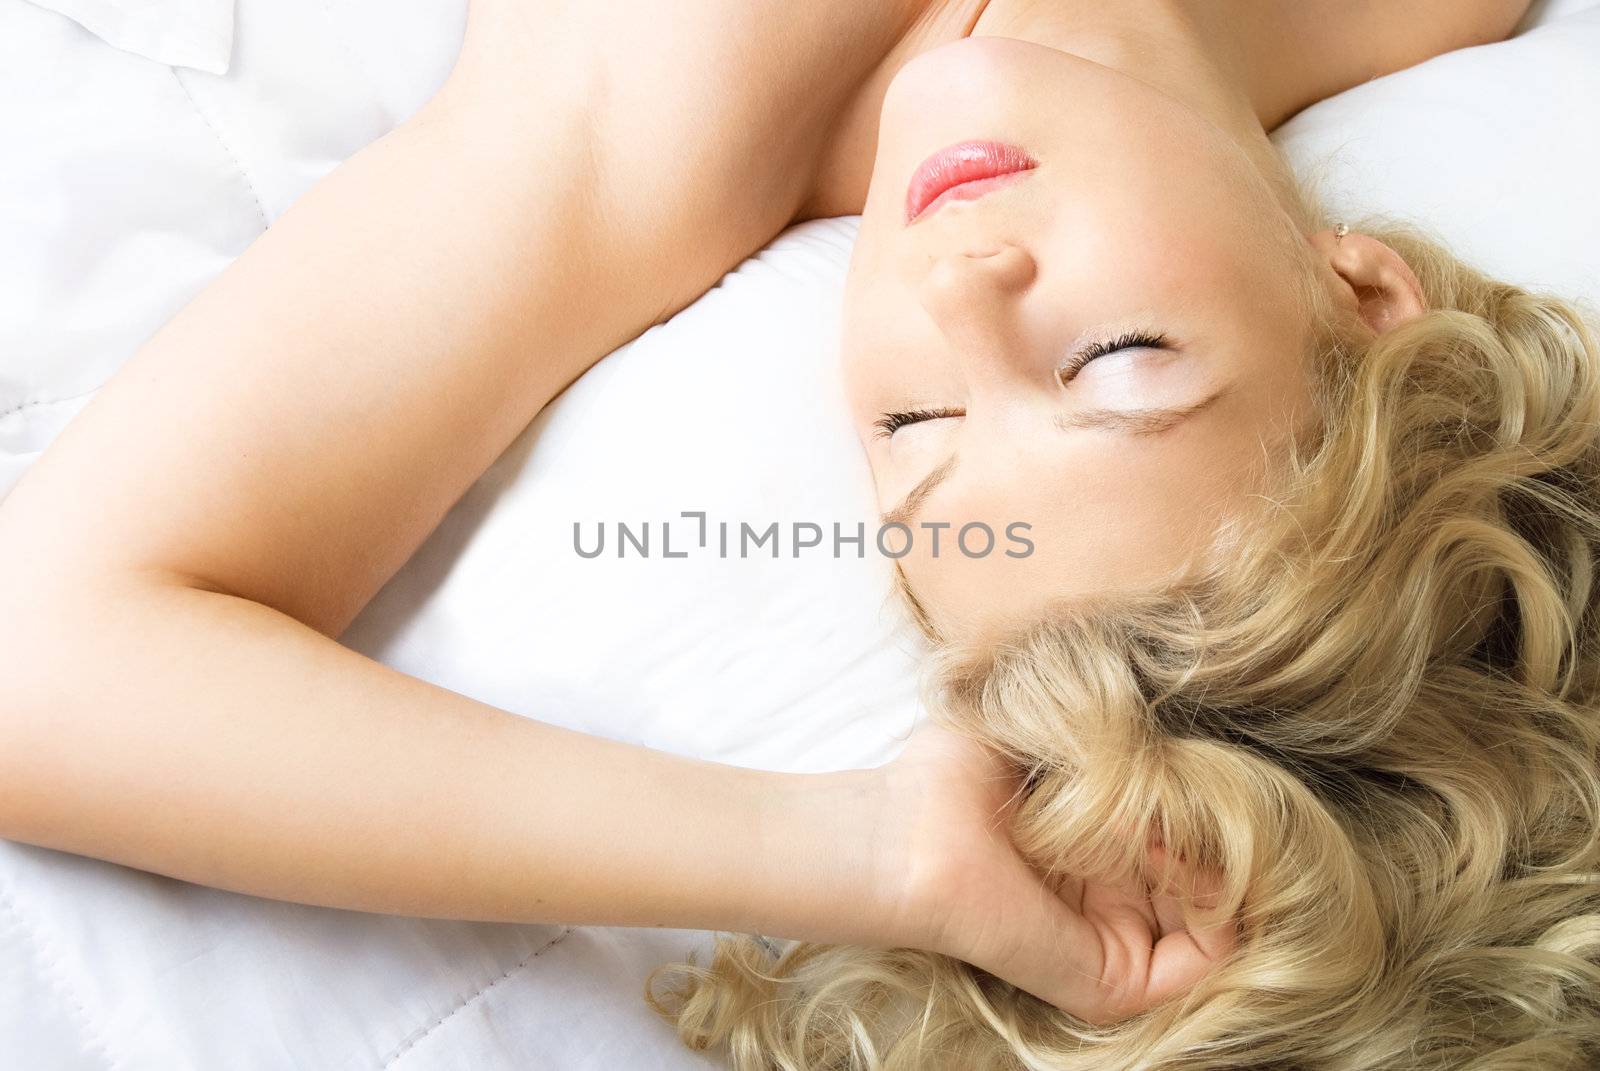 beautiful young blond woman sleeping on the shite sheets